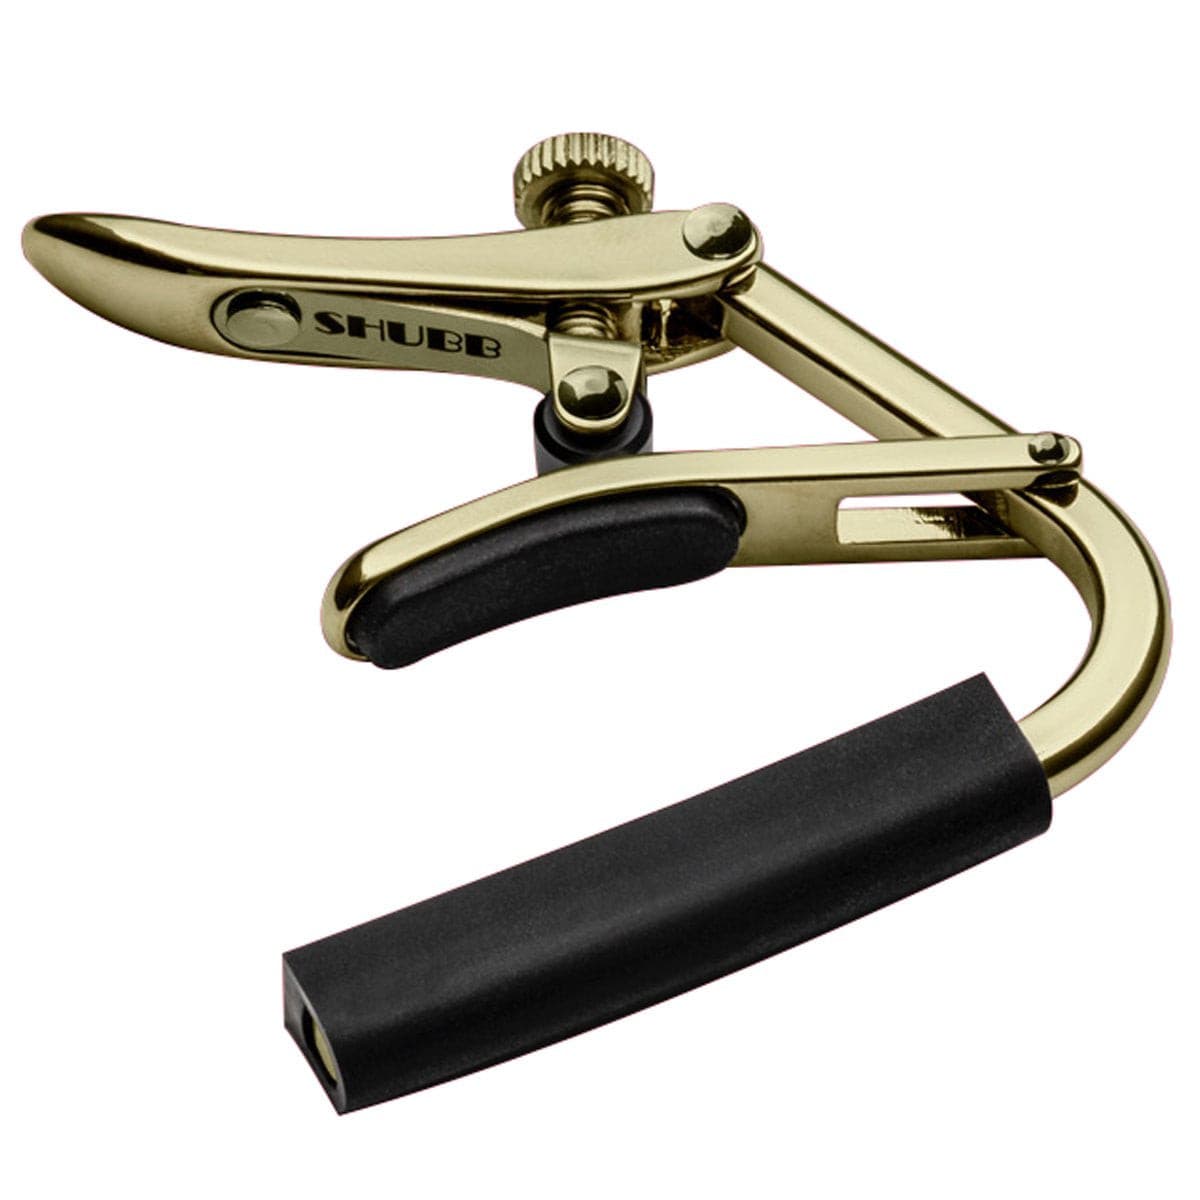 Shubb 'Capo Royale' Steel String Guitar Capo - Gold, Accessory for sale at Richards Guitars.